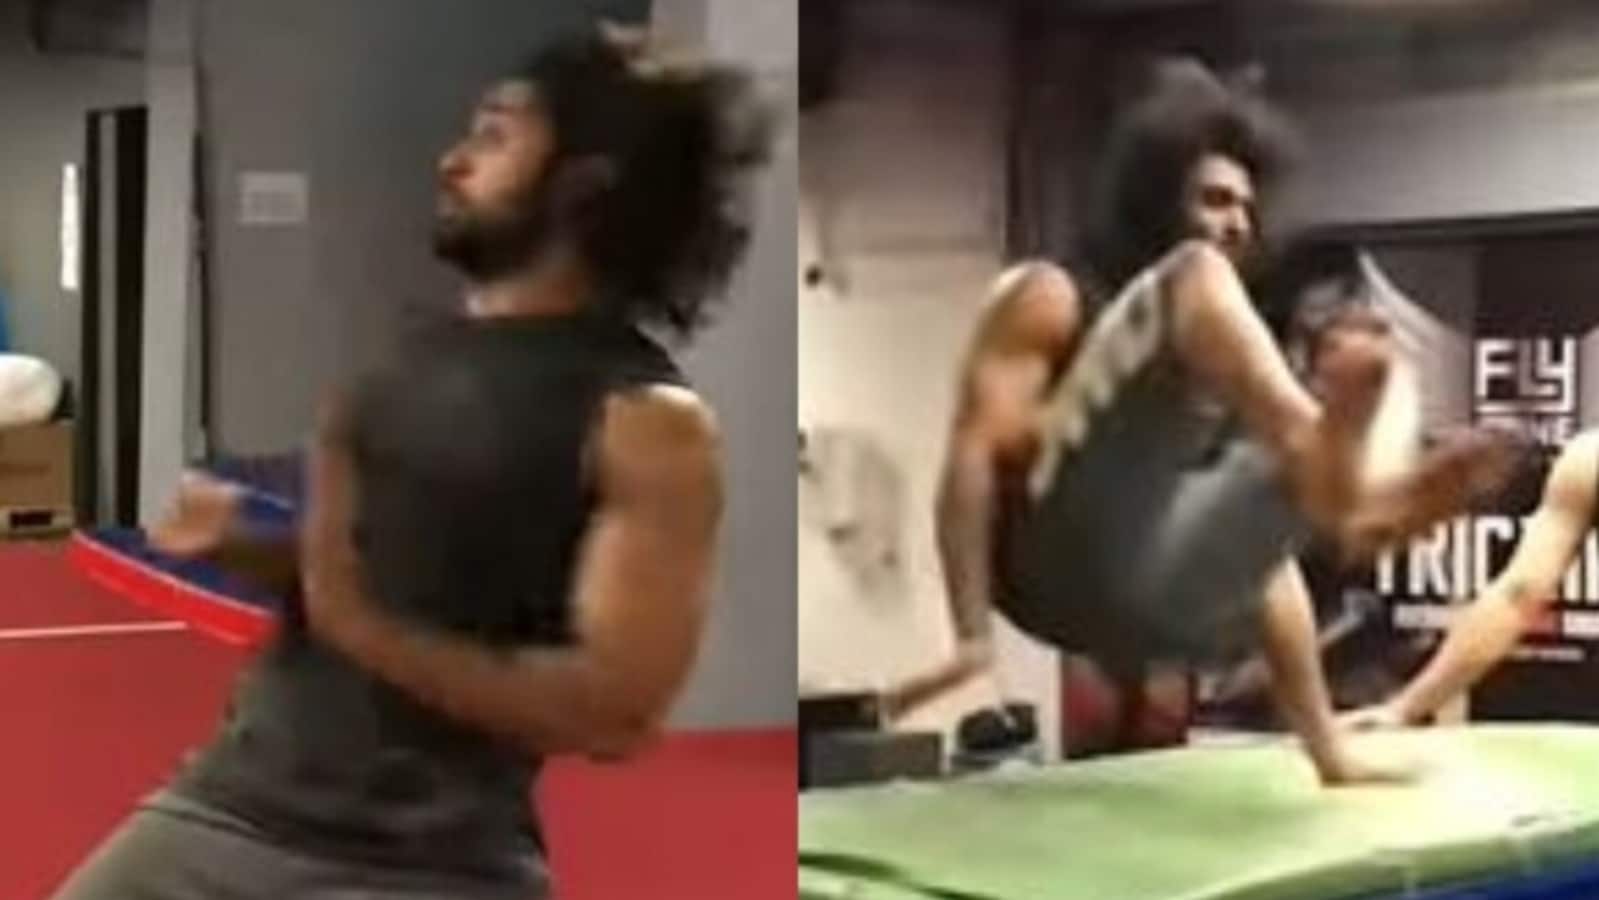 Vijay Deverakonda says ‘learn from mistakes’ in new post, shares video as he misses stunt training. Watch